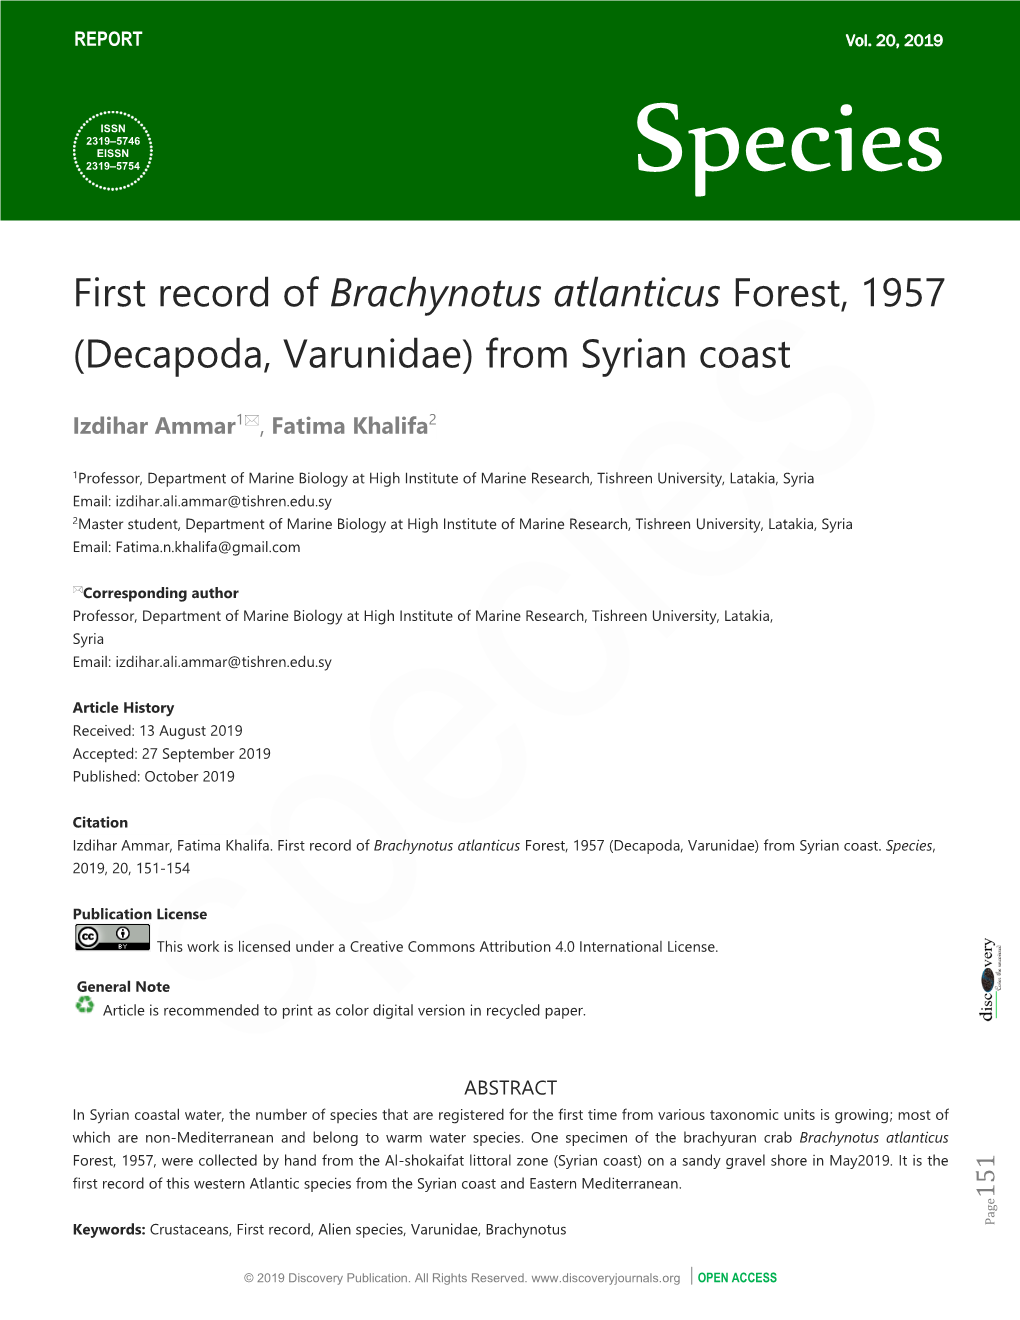 First Record of Brachynotus Atlanticus Forest, 1957 (Decapoda, Varunidae) from Syrian Coast